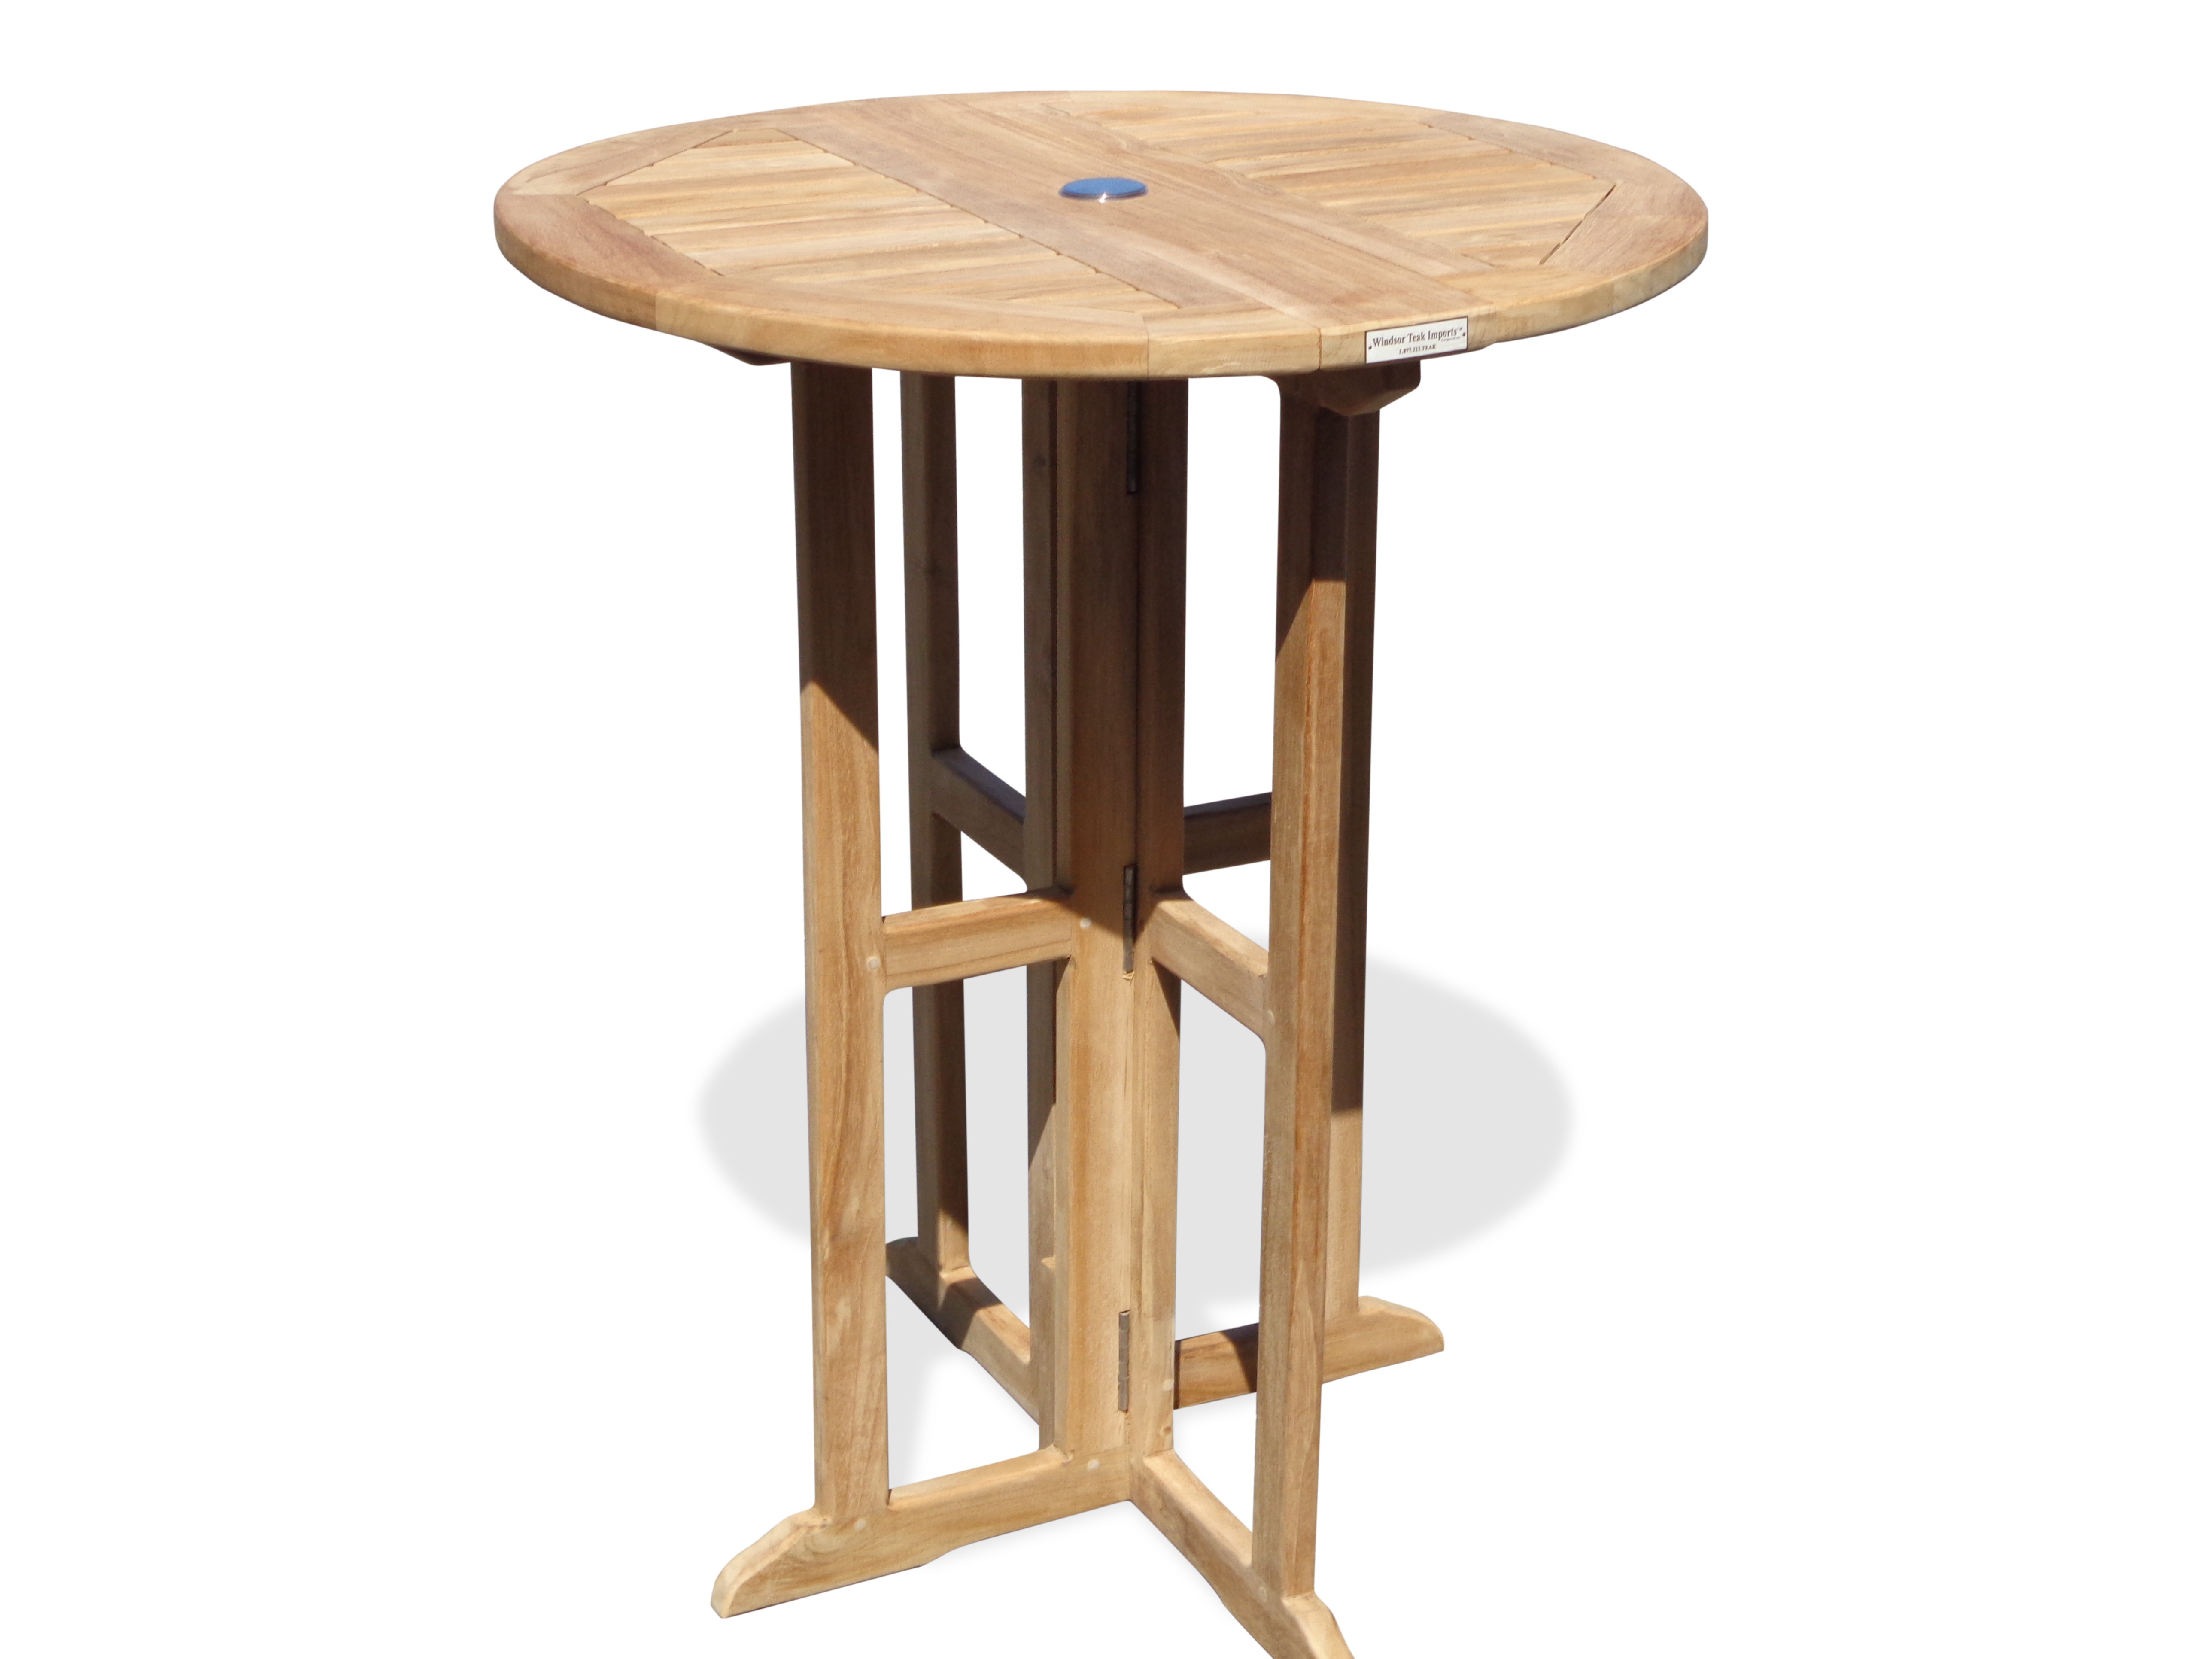 Grade A Teak Bimini 32" Round Drop Leaf Folding Counter Table ...use with 1 Leaf Up or 2.... Makes 2 different tables (Counter height is 5" lower than bar)